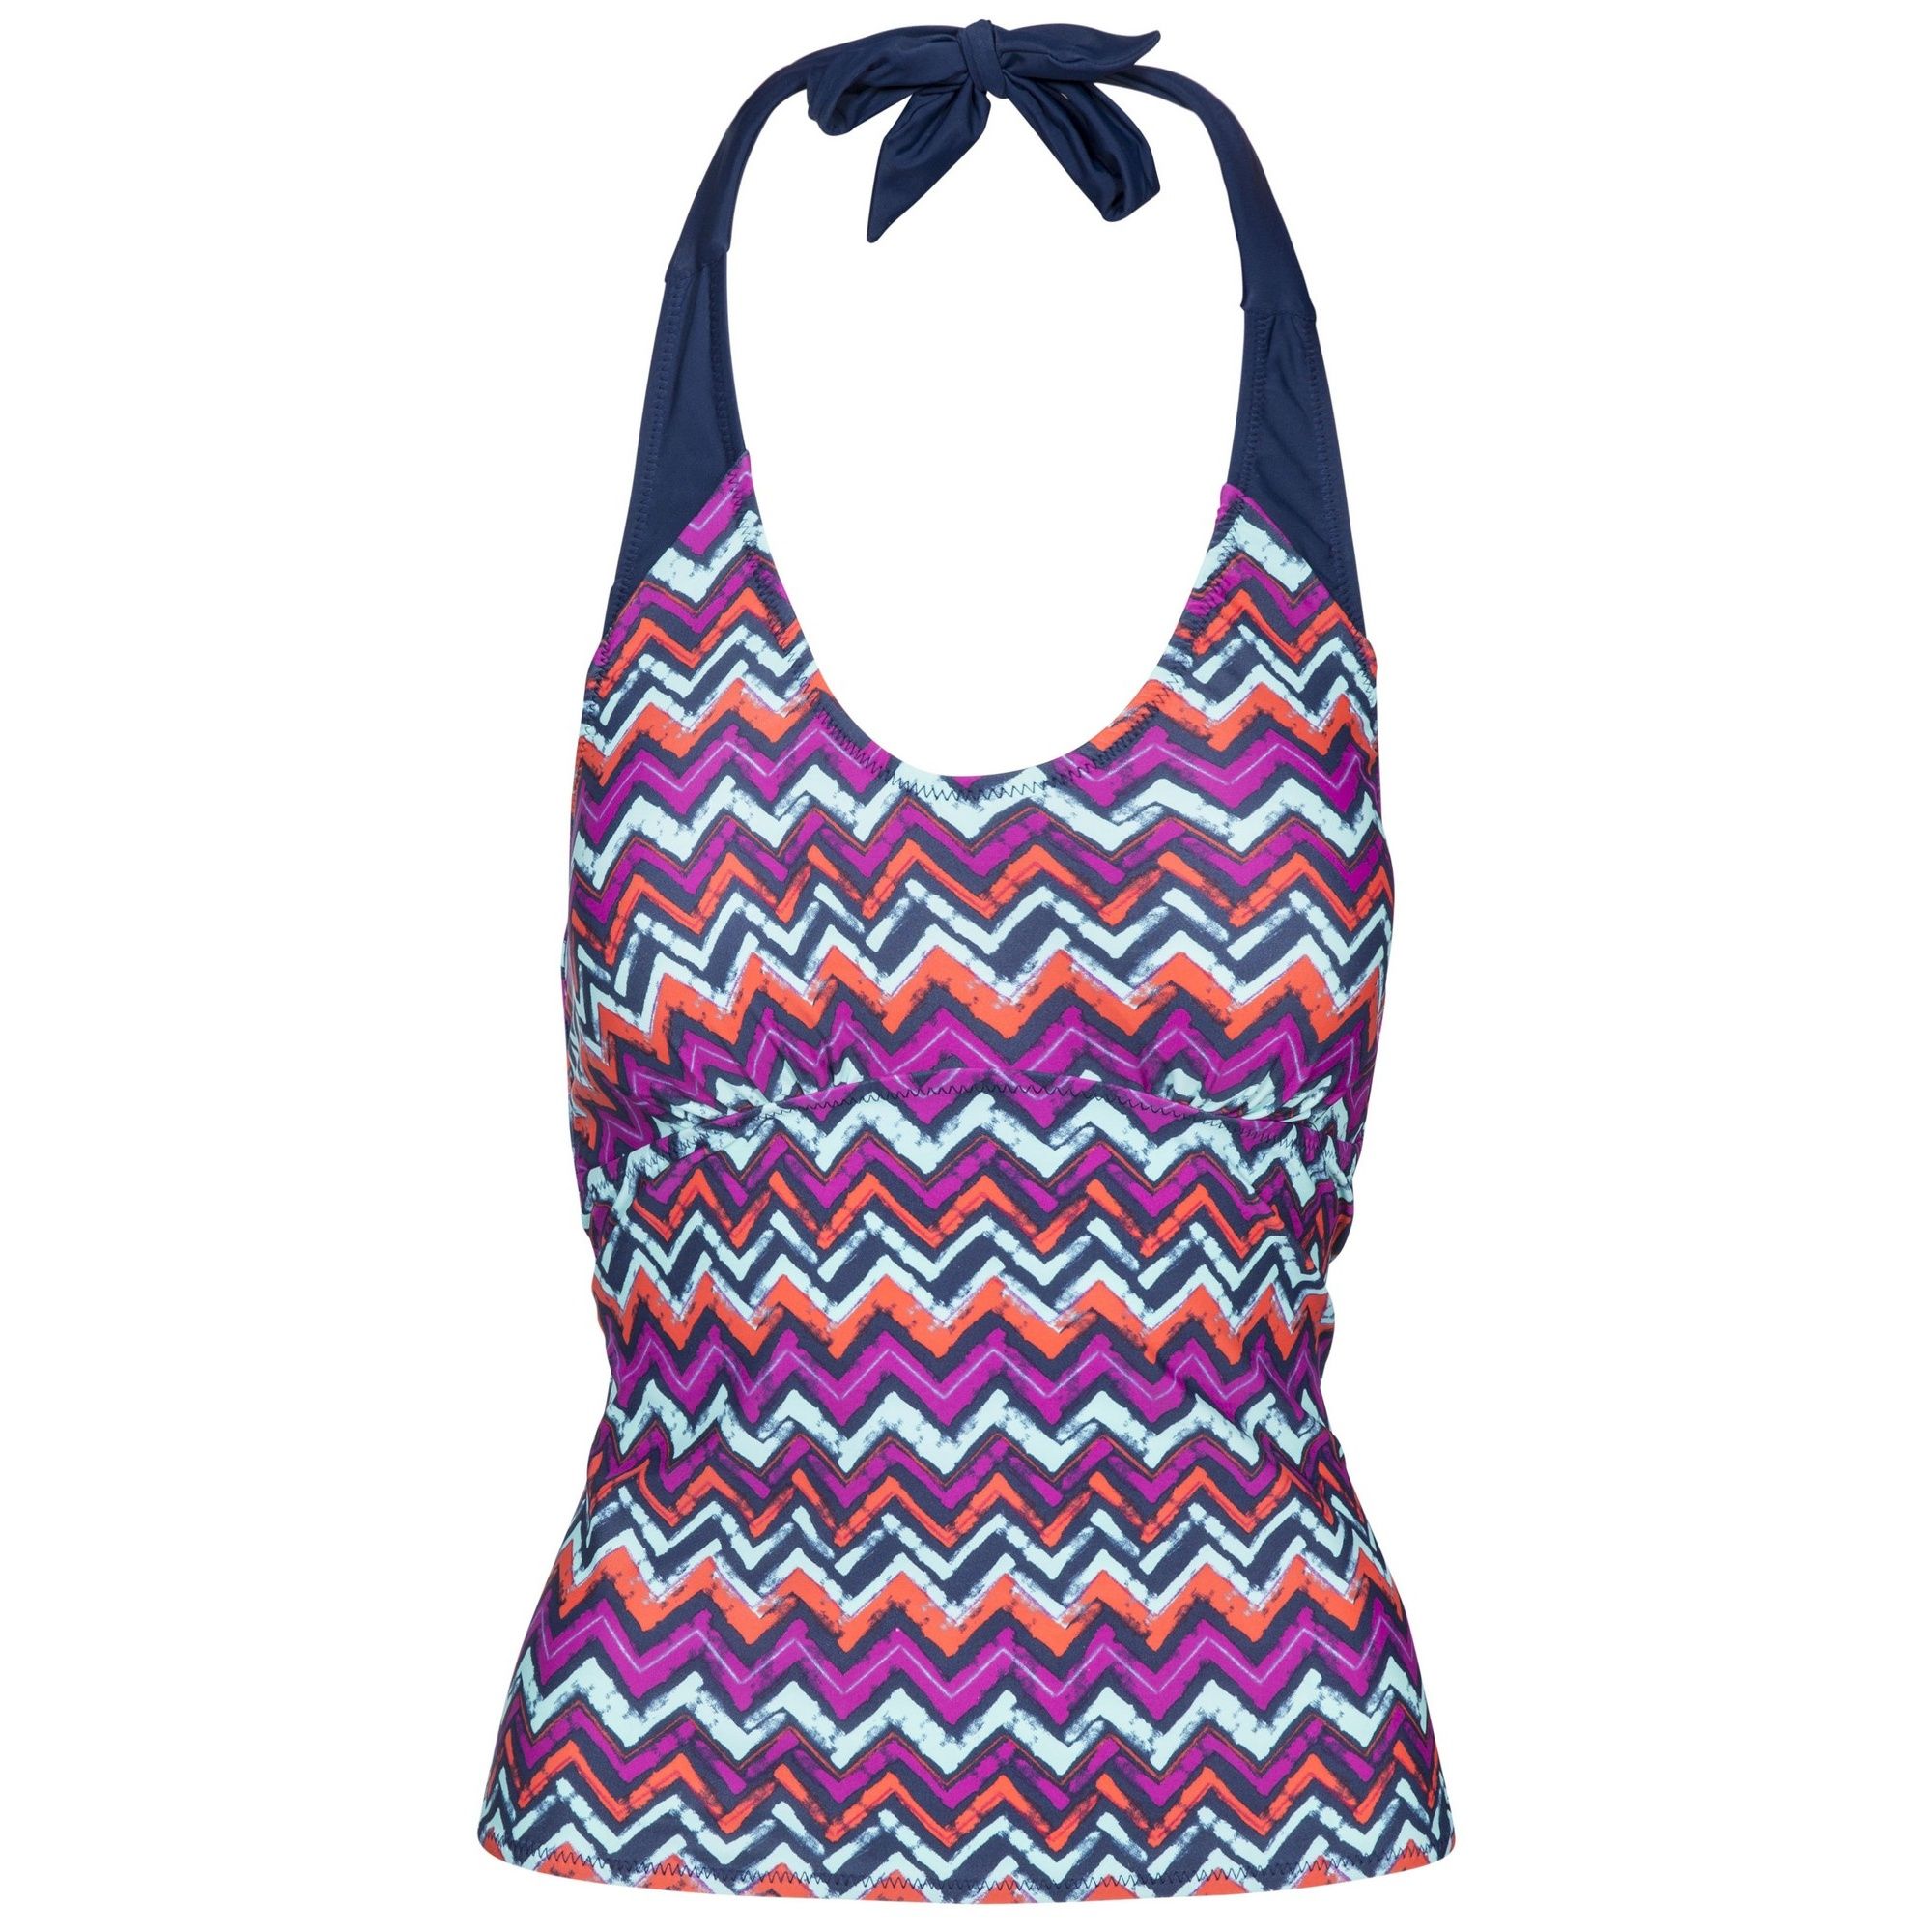 Tankini top. Halter neck ties. Contrast trims. Removable bust pads. 80% Polyamide, 20% Elastane. Trespass Womens Chest Sizing (approx): XS/8 - 32in/81cm, S/10 - 34in/86cm, M/12 - 36in/91.4cm, L/14 - 38in/96.5cm, XL/16 - 40in/101.5cm, XXL/18 - 42in/106.5cm.